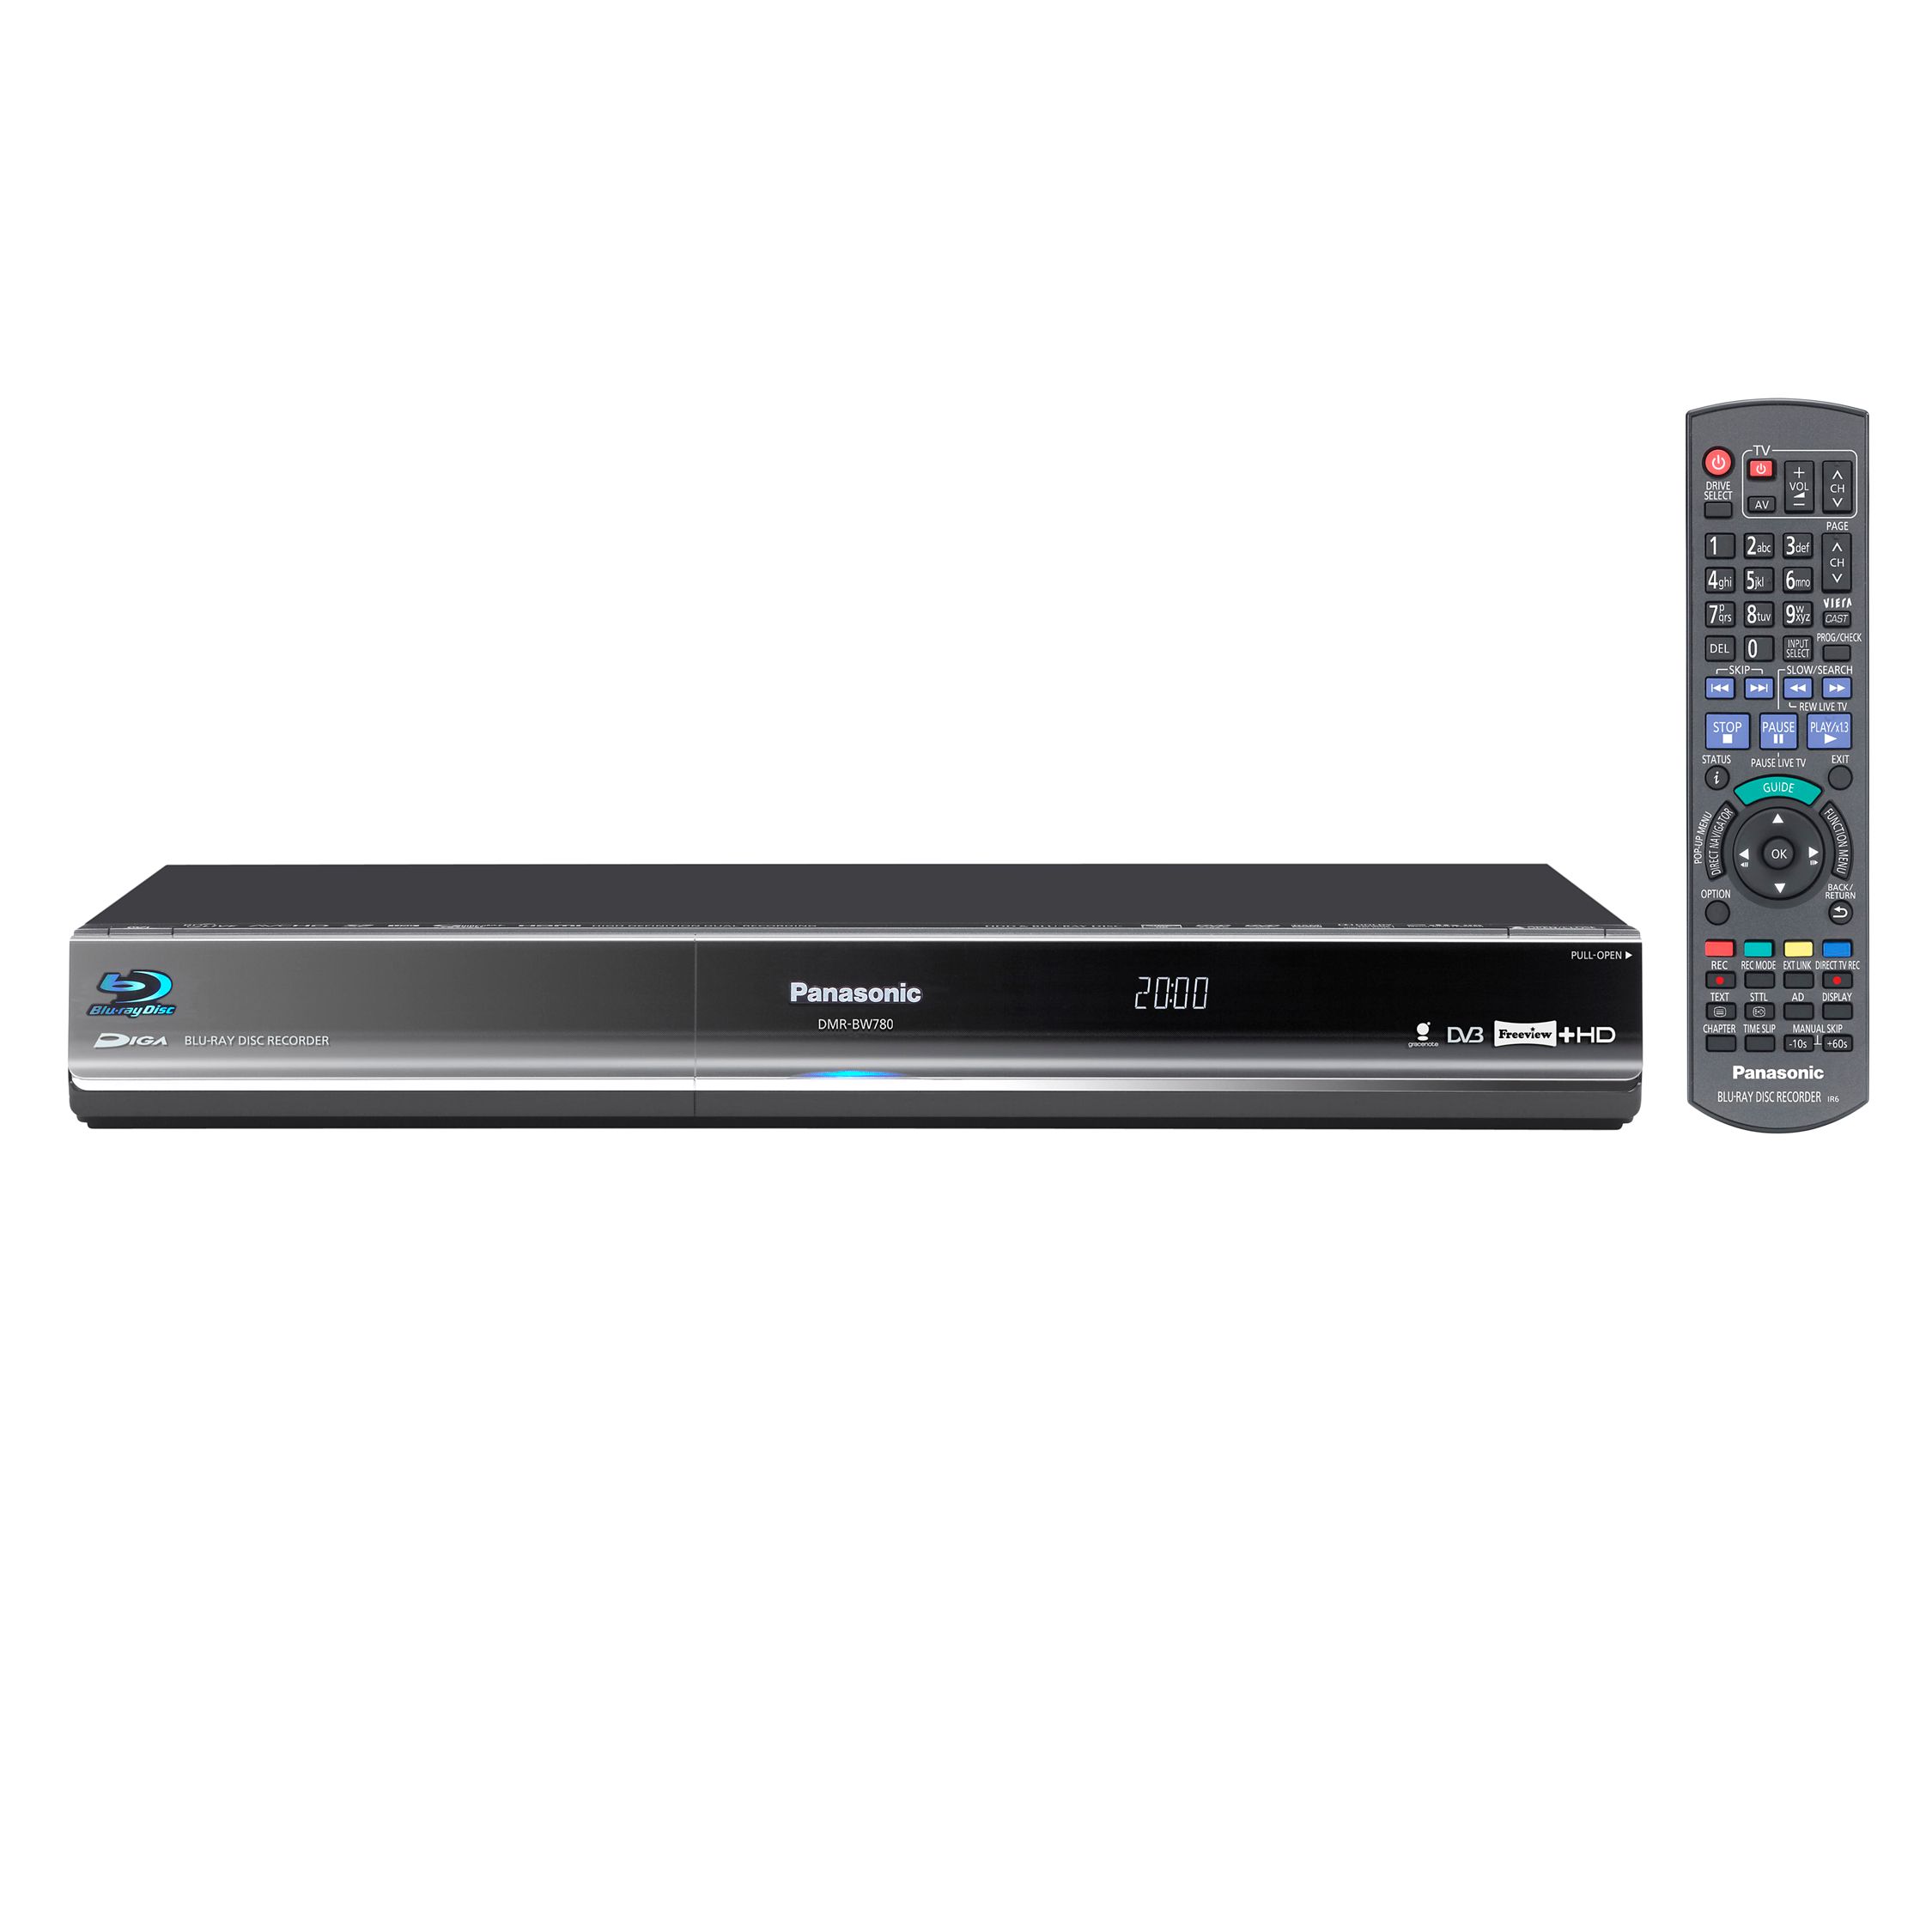 Panasonic DMR-BW780 Blu-ray/DVD/HDD 250GB Digital Recorder with Built-in Freeview+ HD at John Lewis